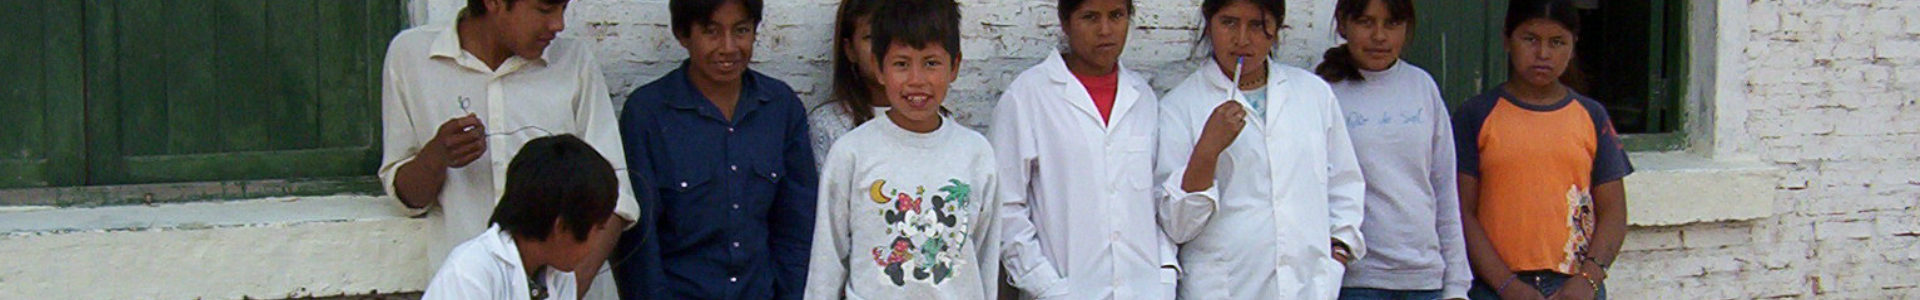 Project 2005 School EGB 676 – Lote 4, Province of Chaco.